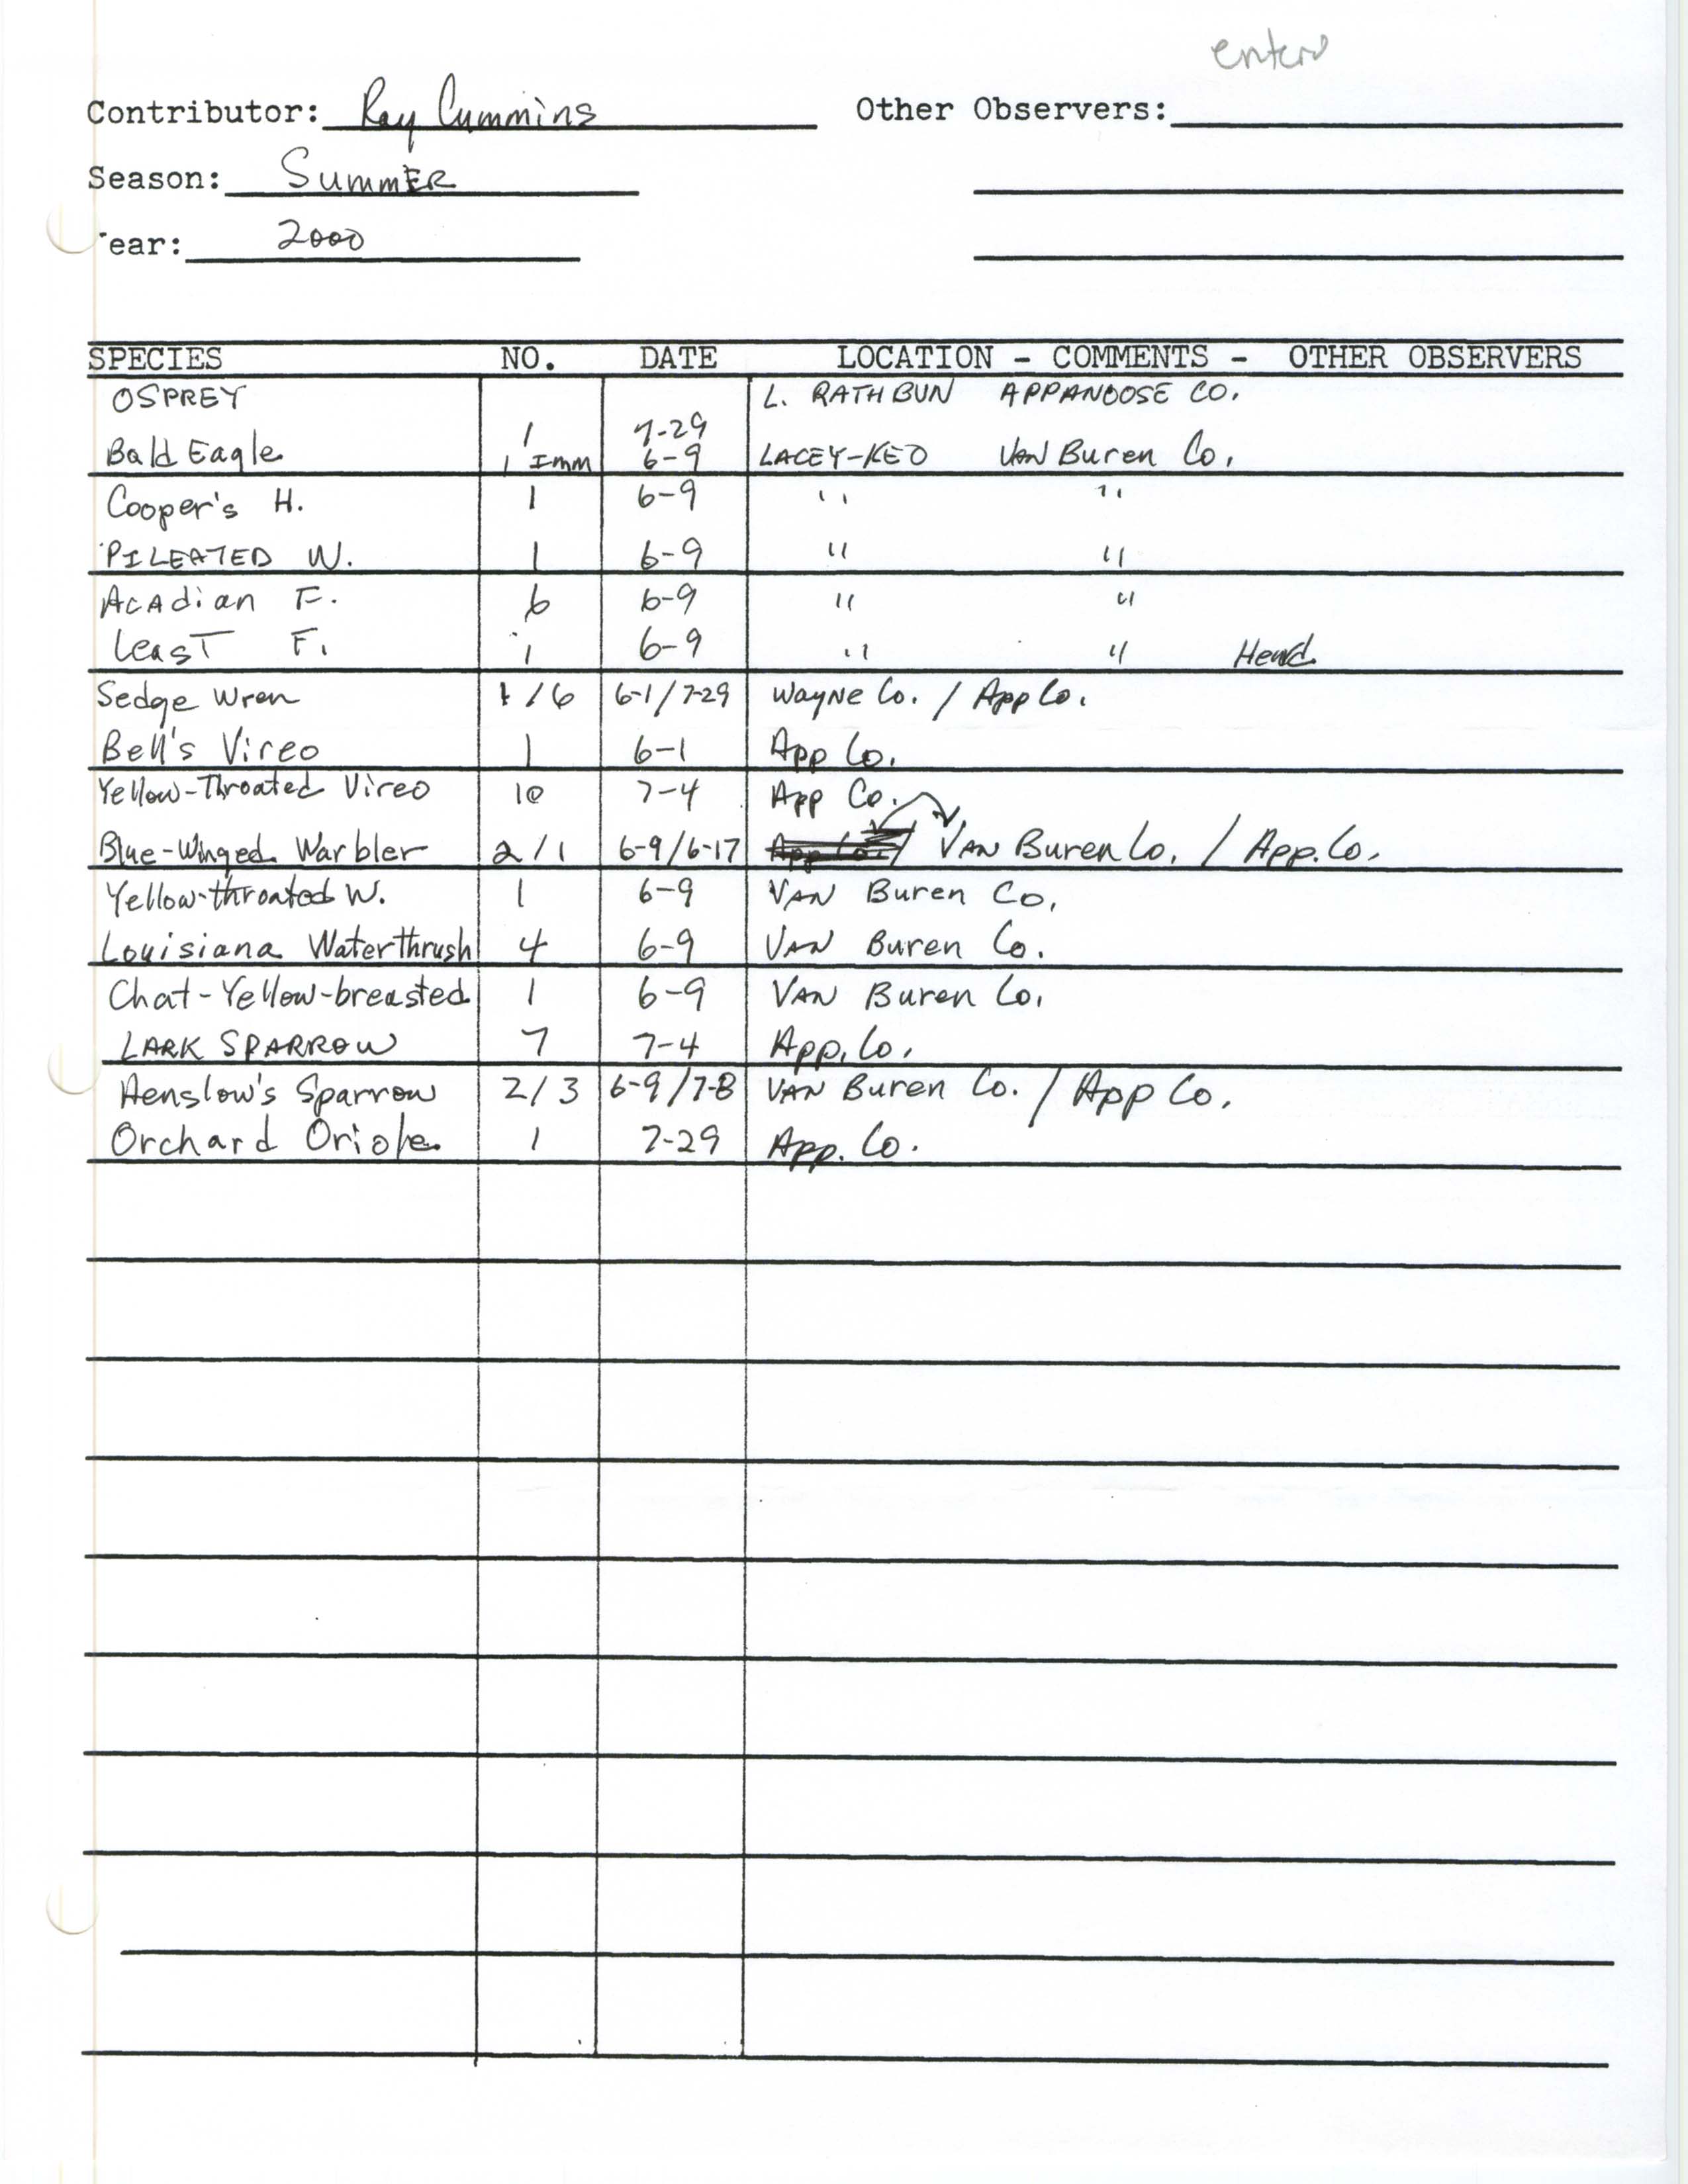 Field notes contributed by Raymond L. Cummins, summer 2000